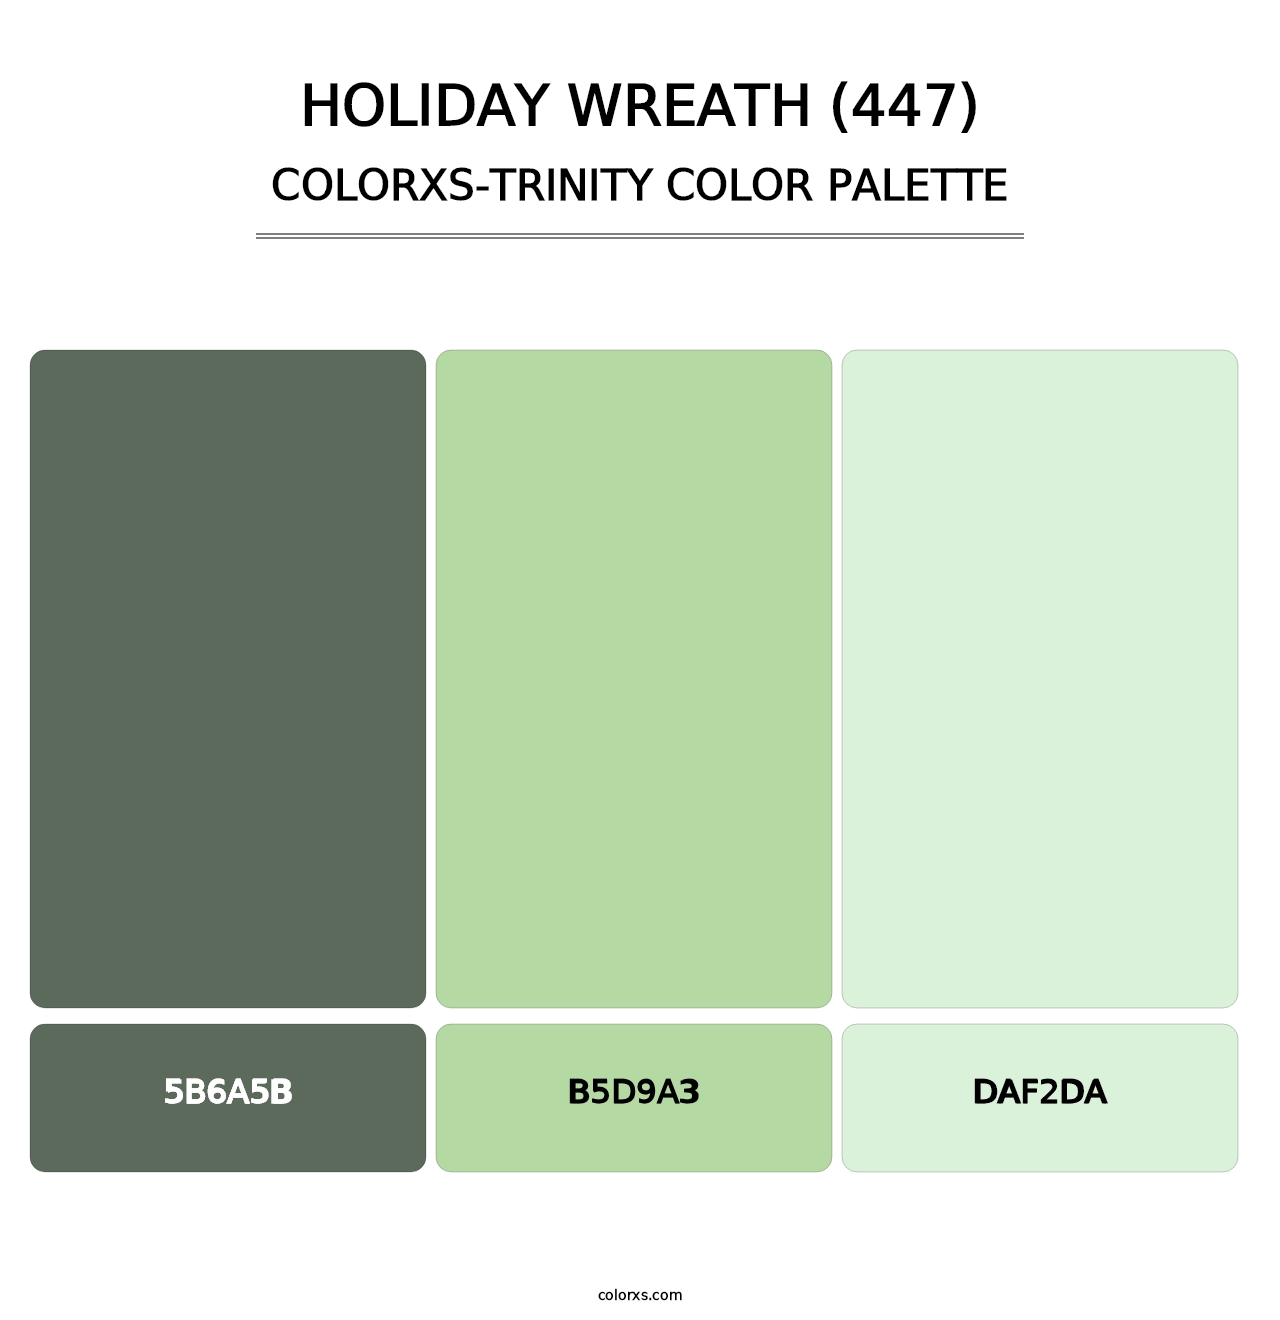 Holiday Wreath (447) - Colorxs Trinity Palette